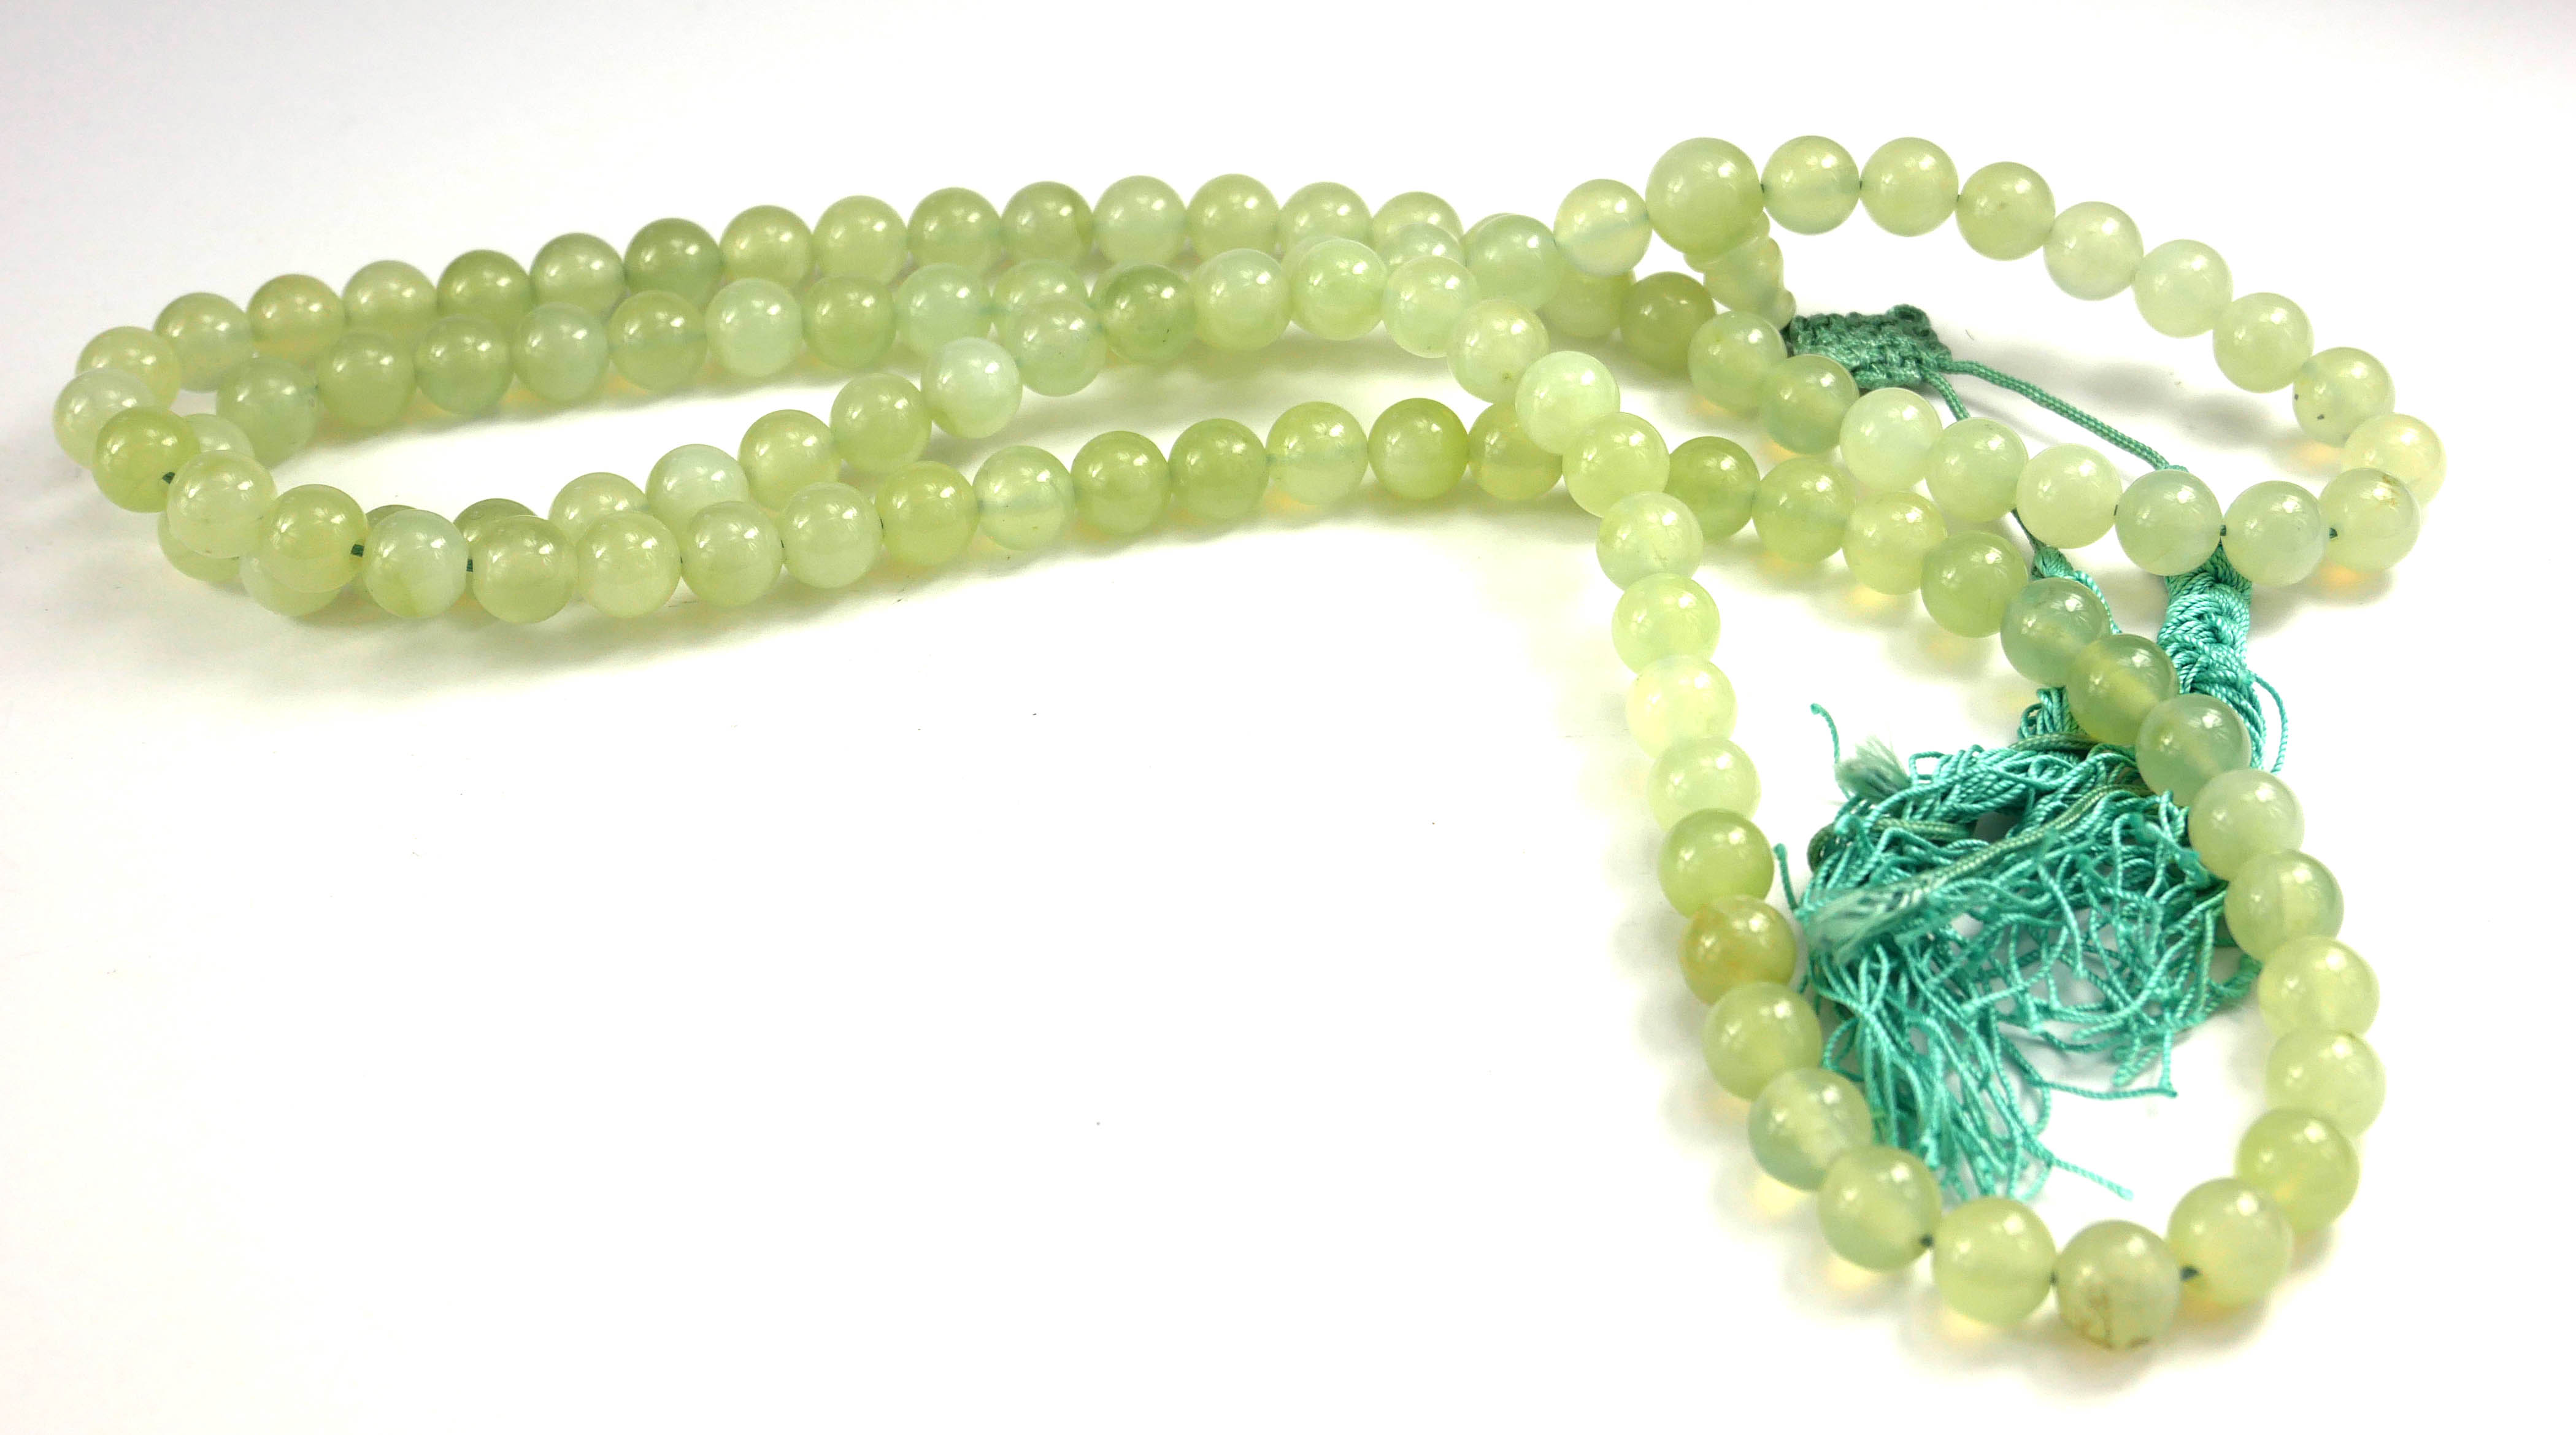 A CHINESE LIGHT GREEN JADE NECKLACE Made with 109 spherical beads, with a dangling turquoise silk